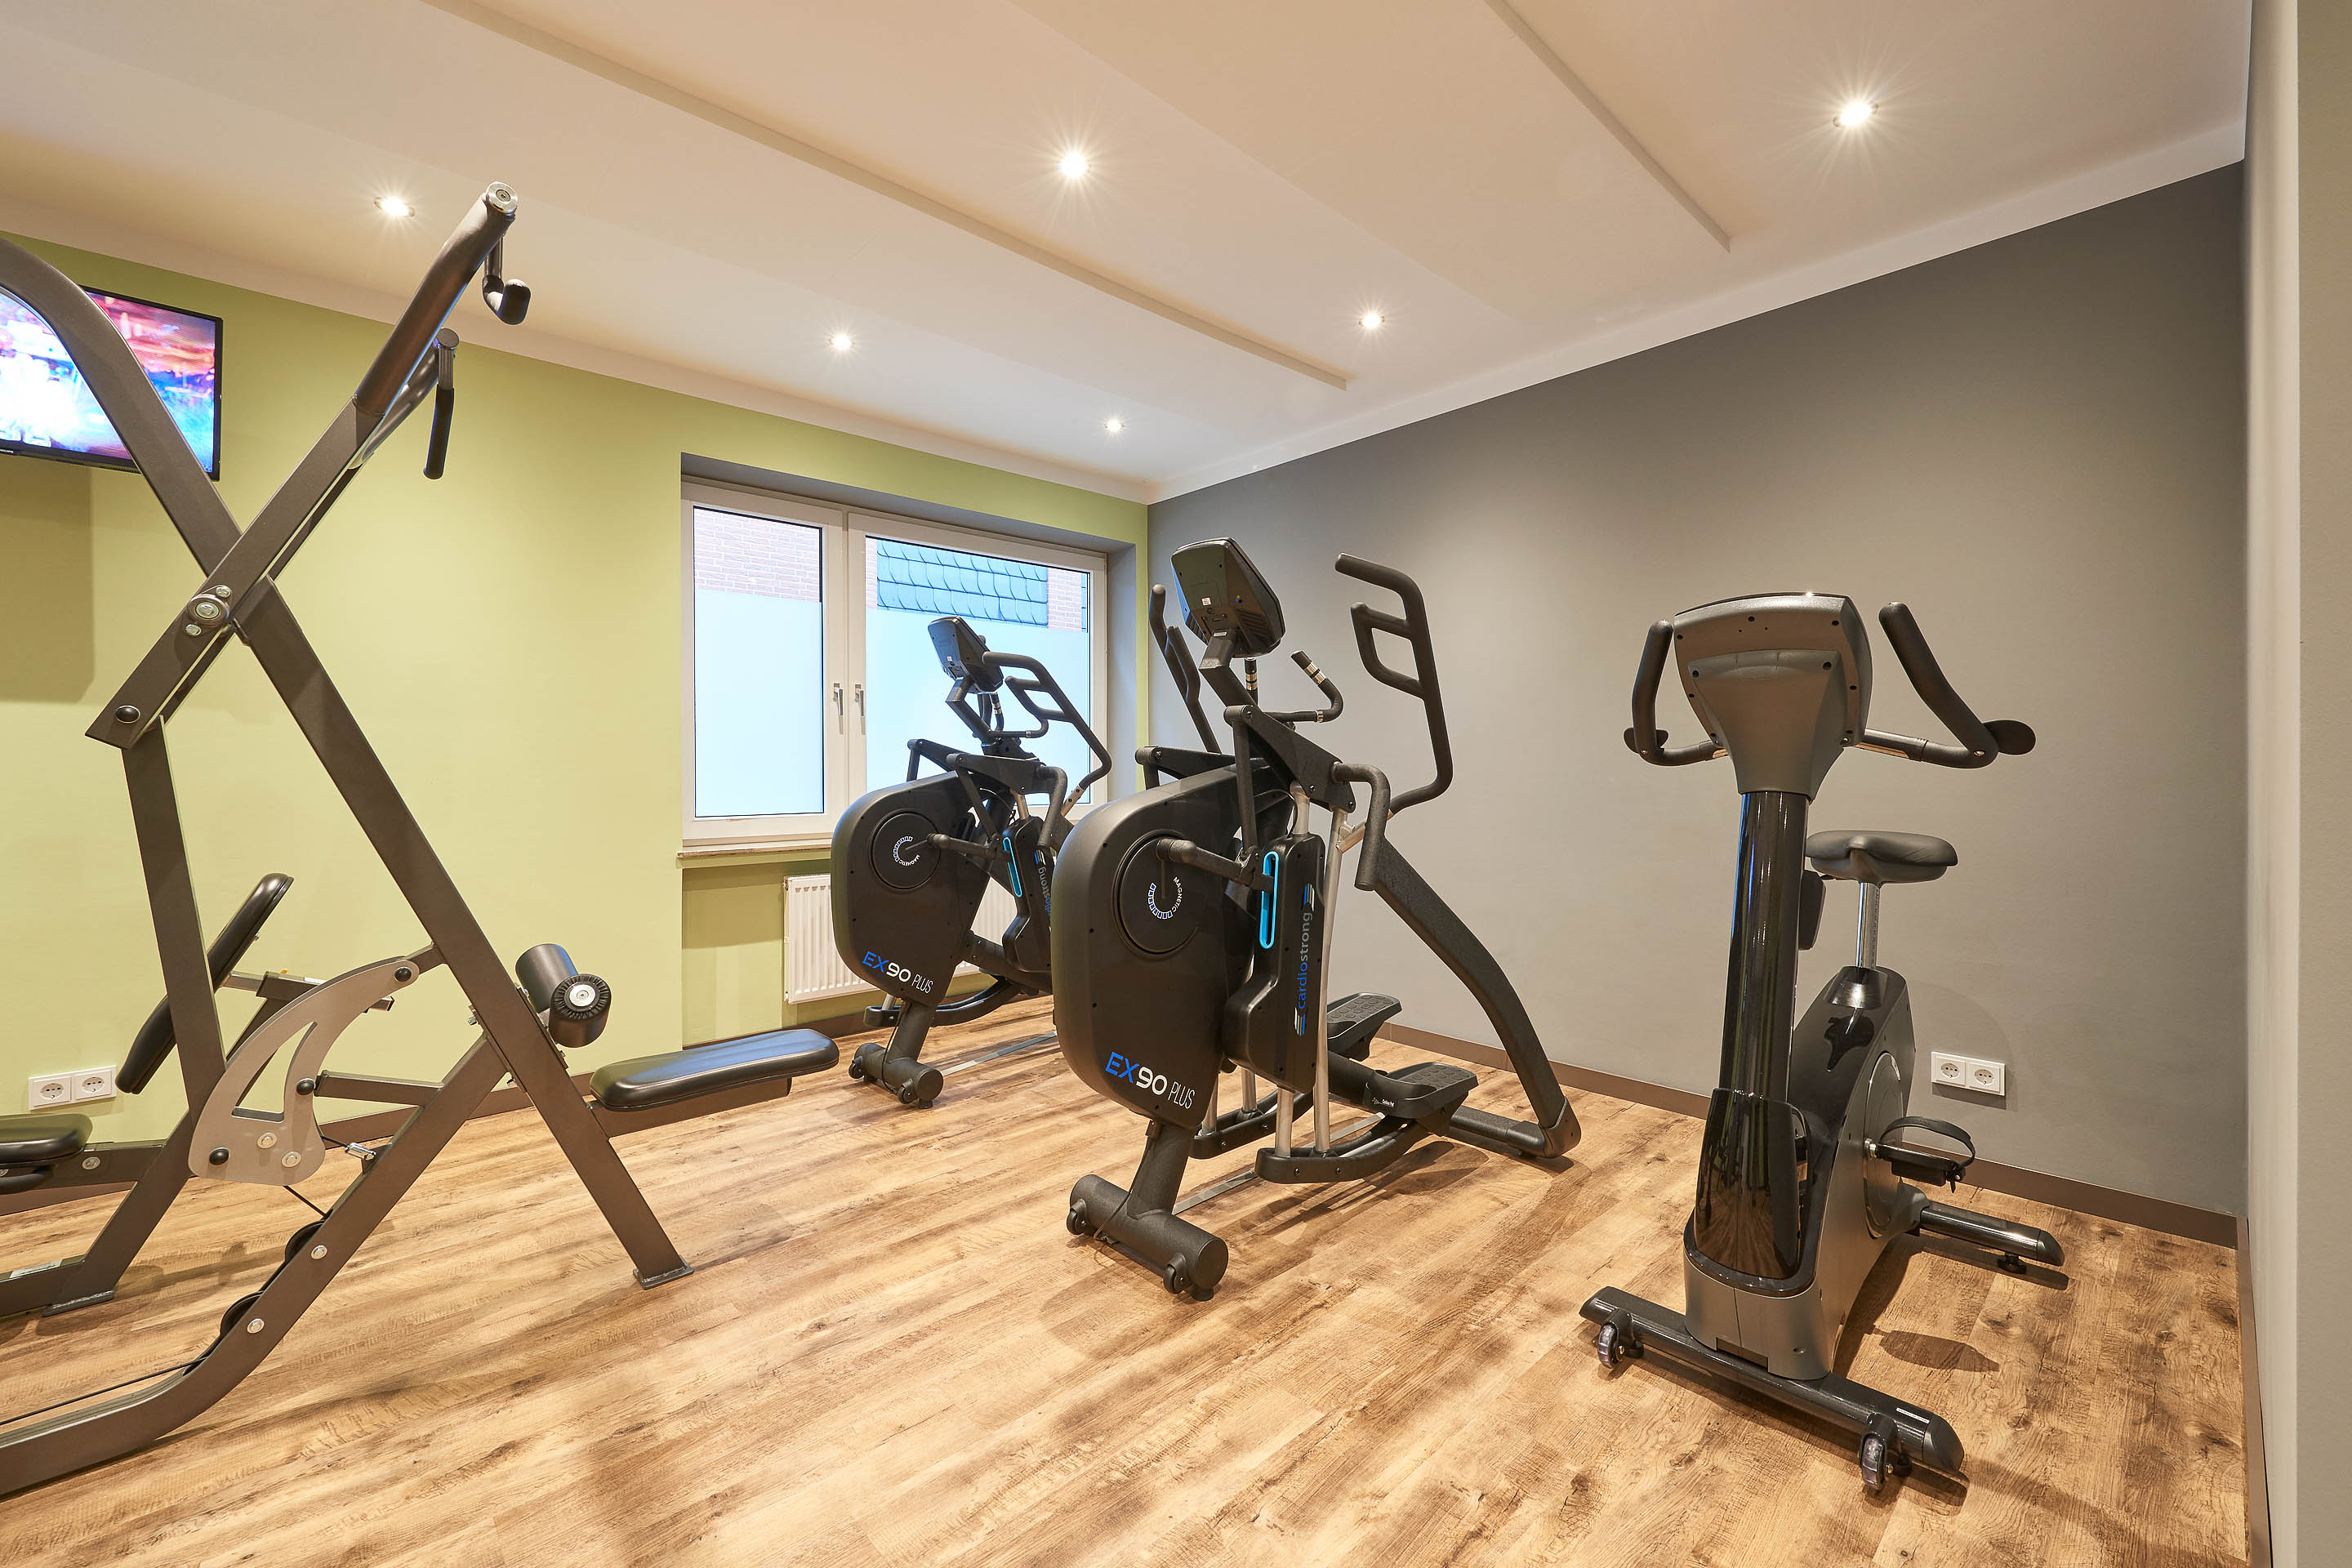 Fitness area at the Hotel Munte am Stadtwald - Bremen